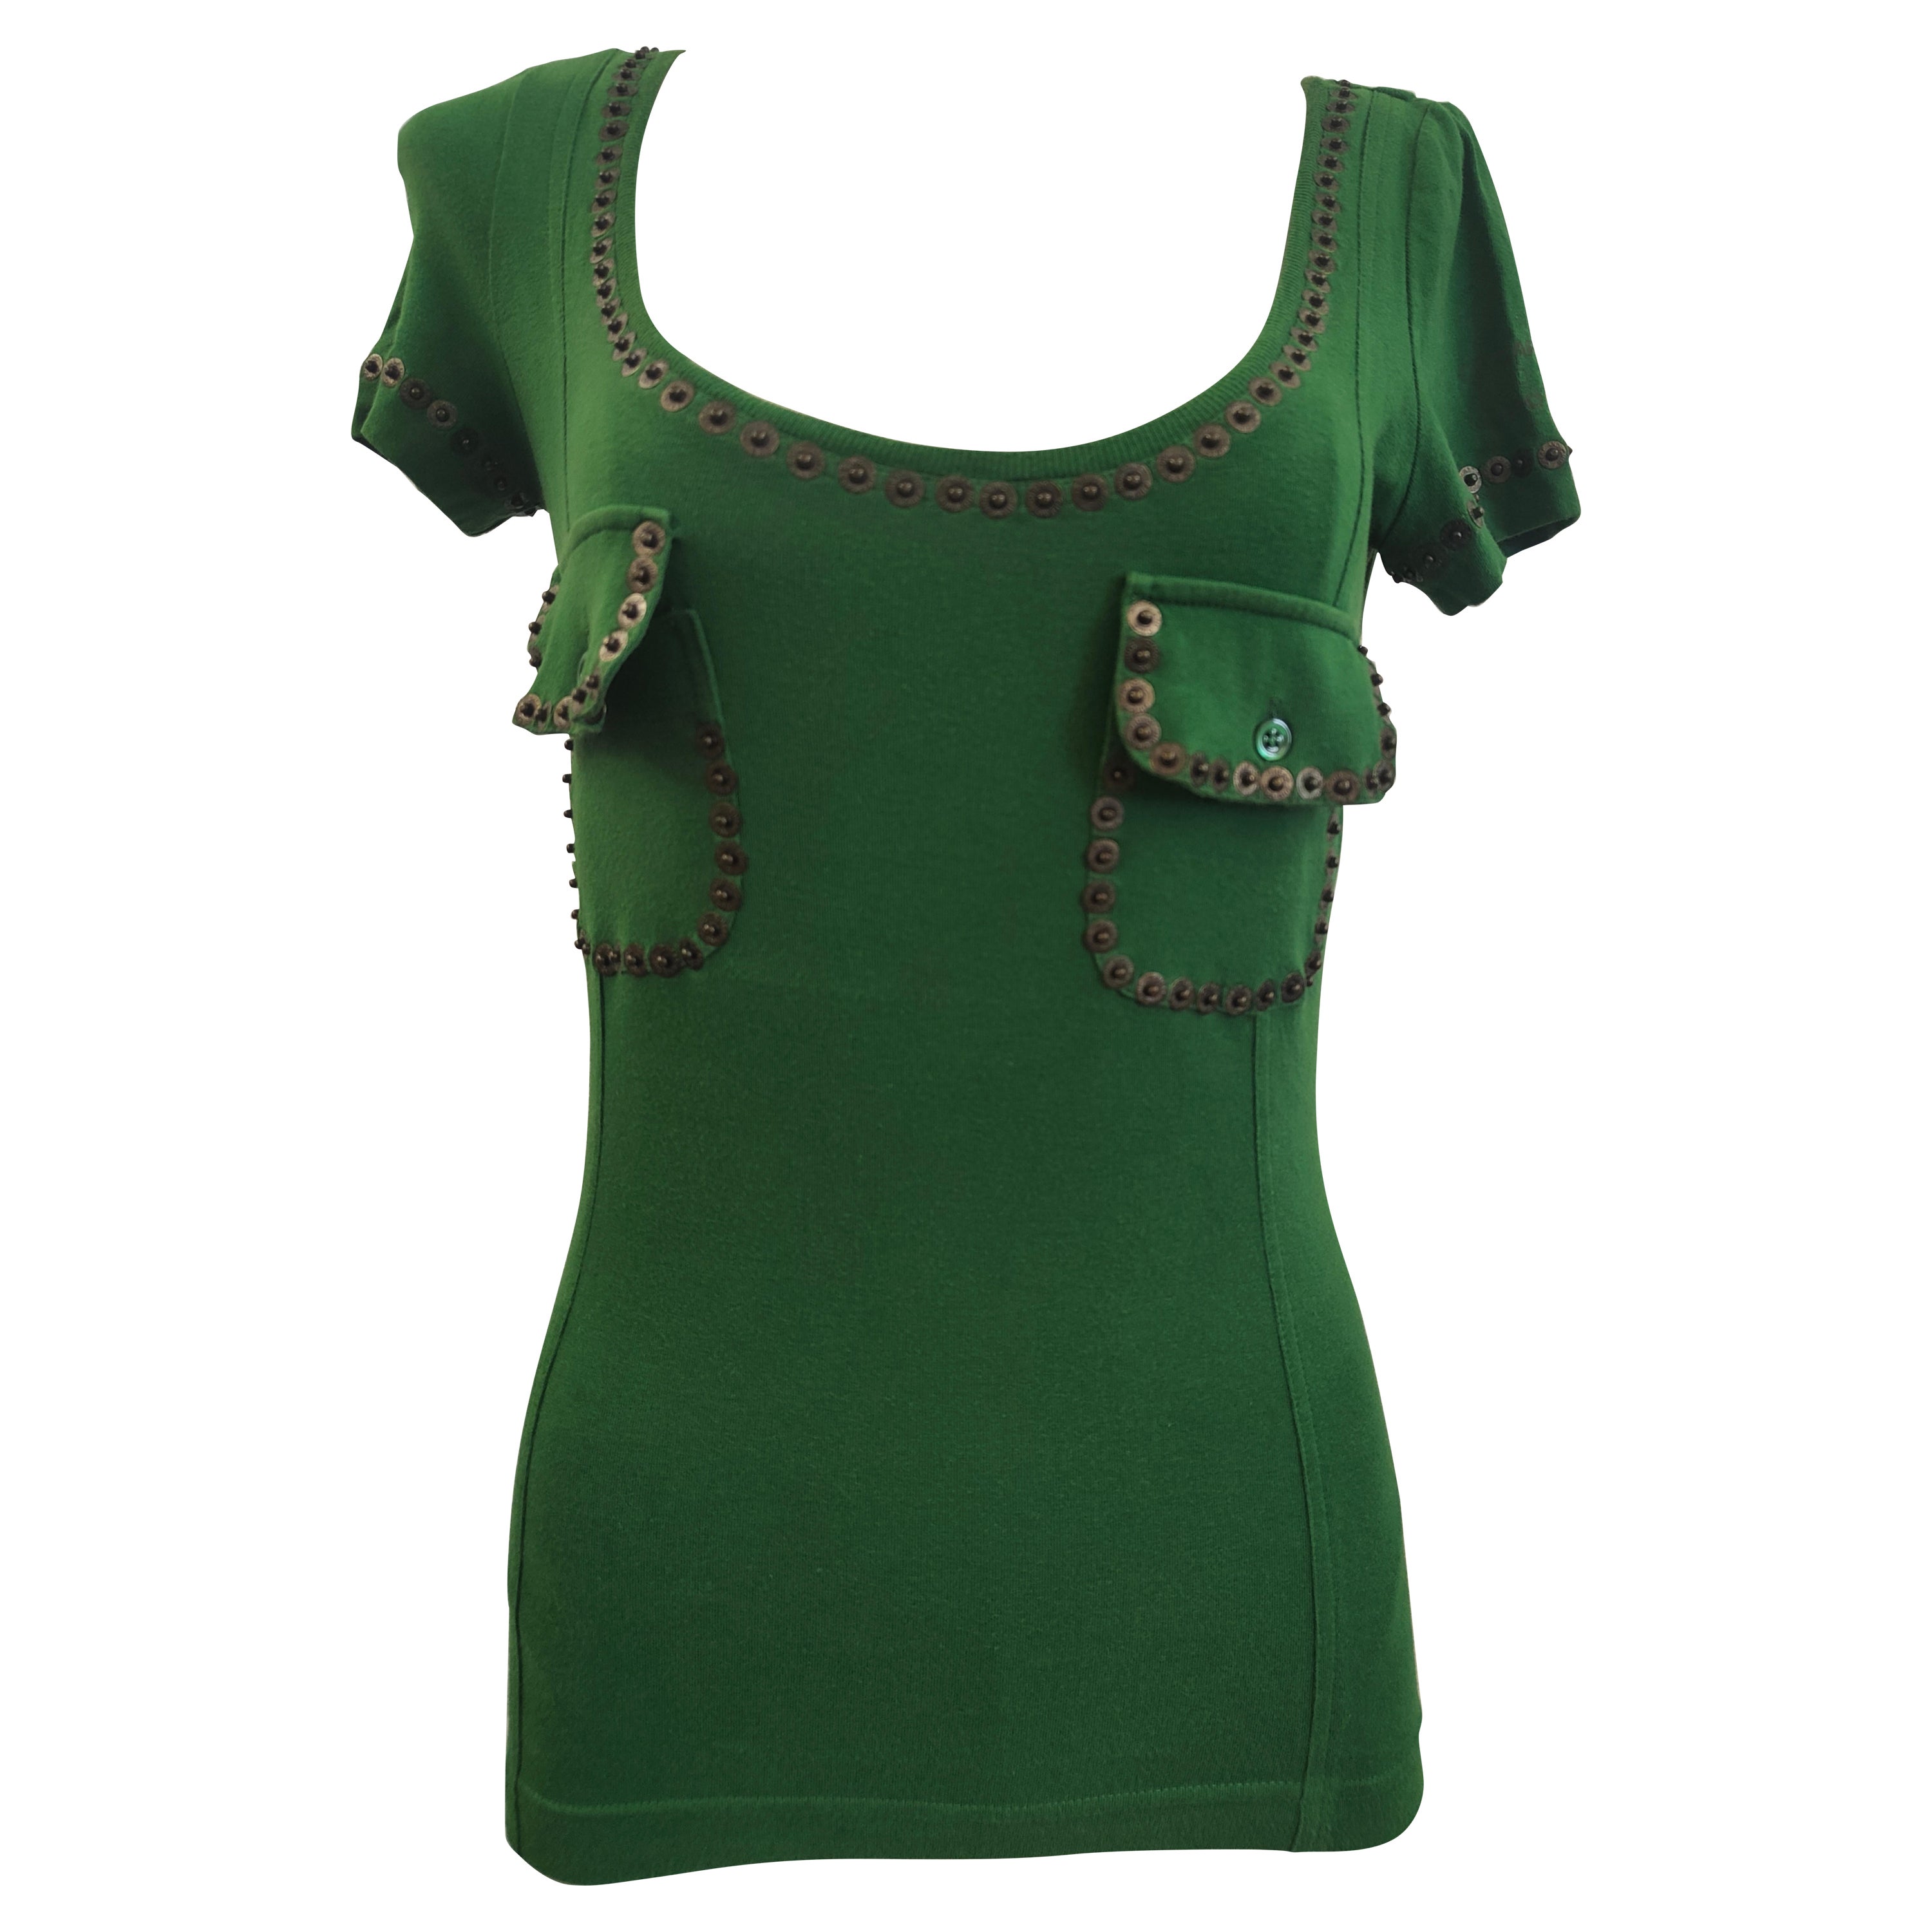 Moschino Cheap & Chic green with beads t-shirt 